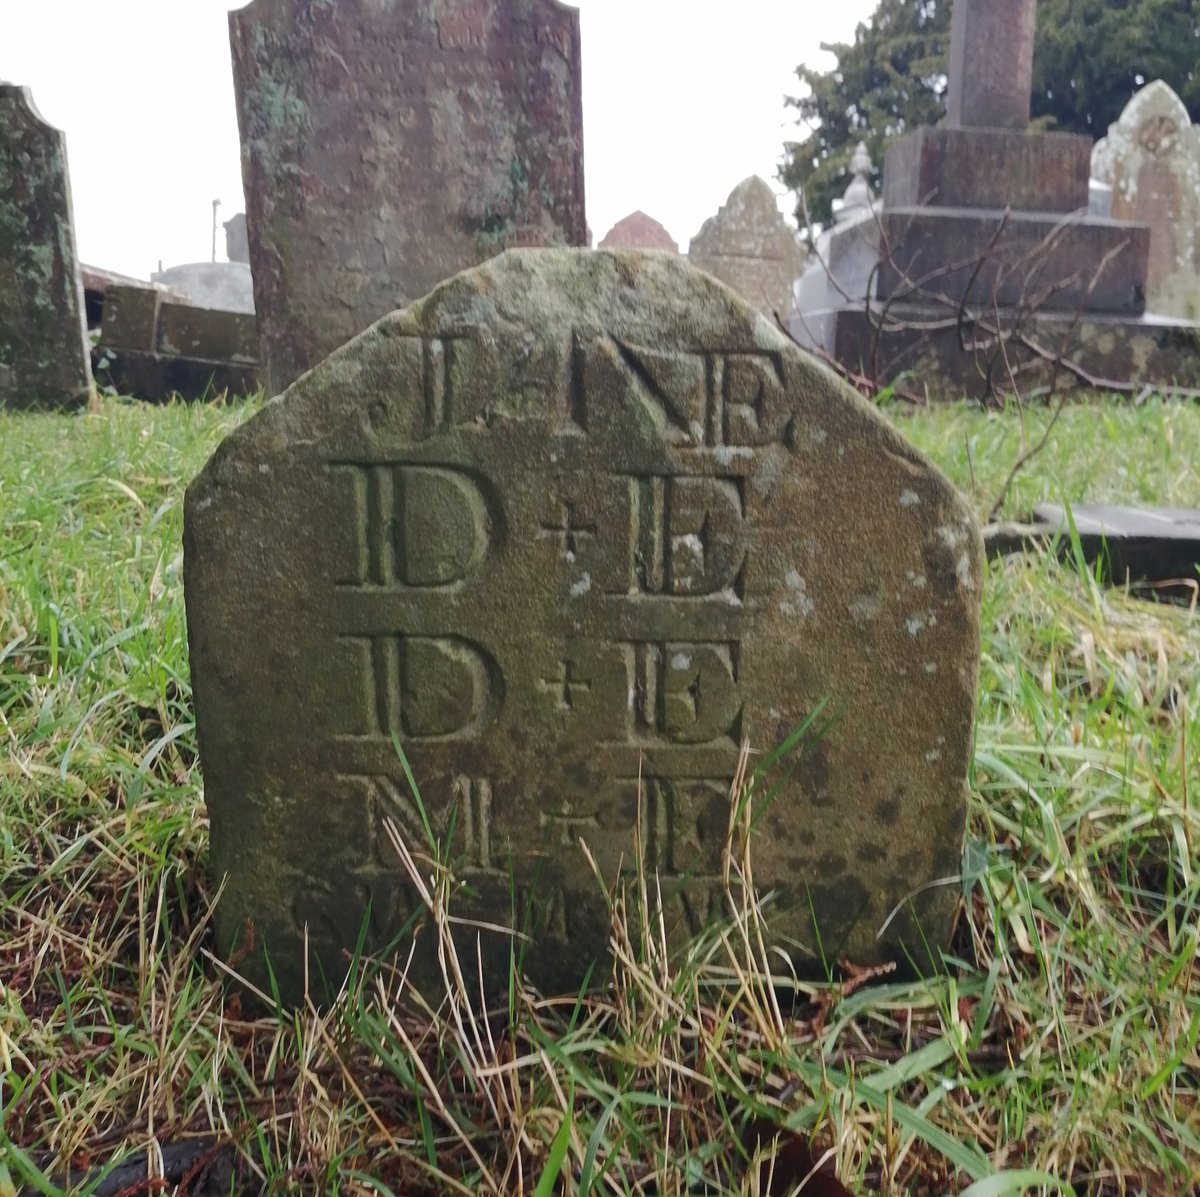 An example of a pauper/low income gravemarker at St Cynwyd's Church, Llangynwyd.  #Wales  #History